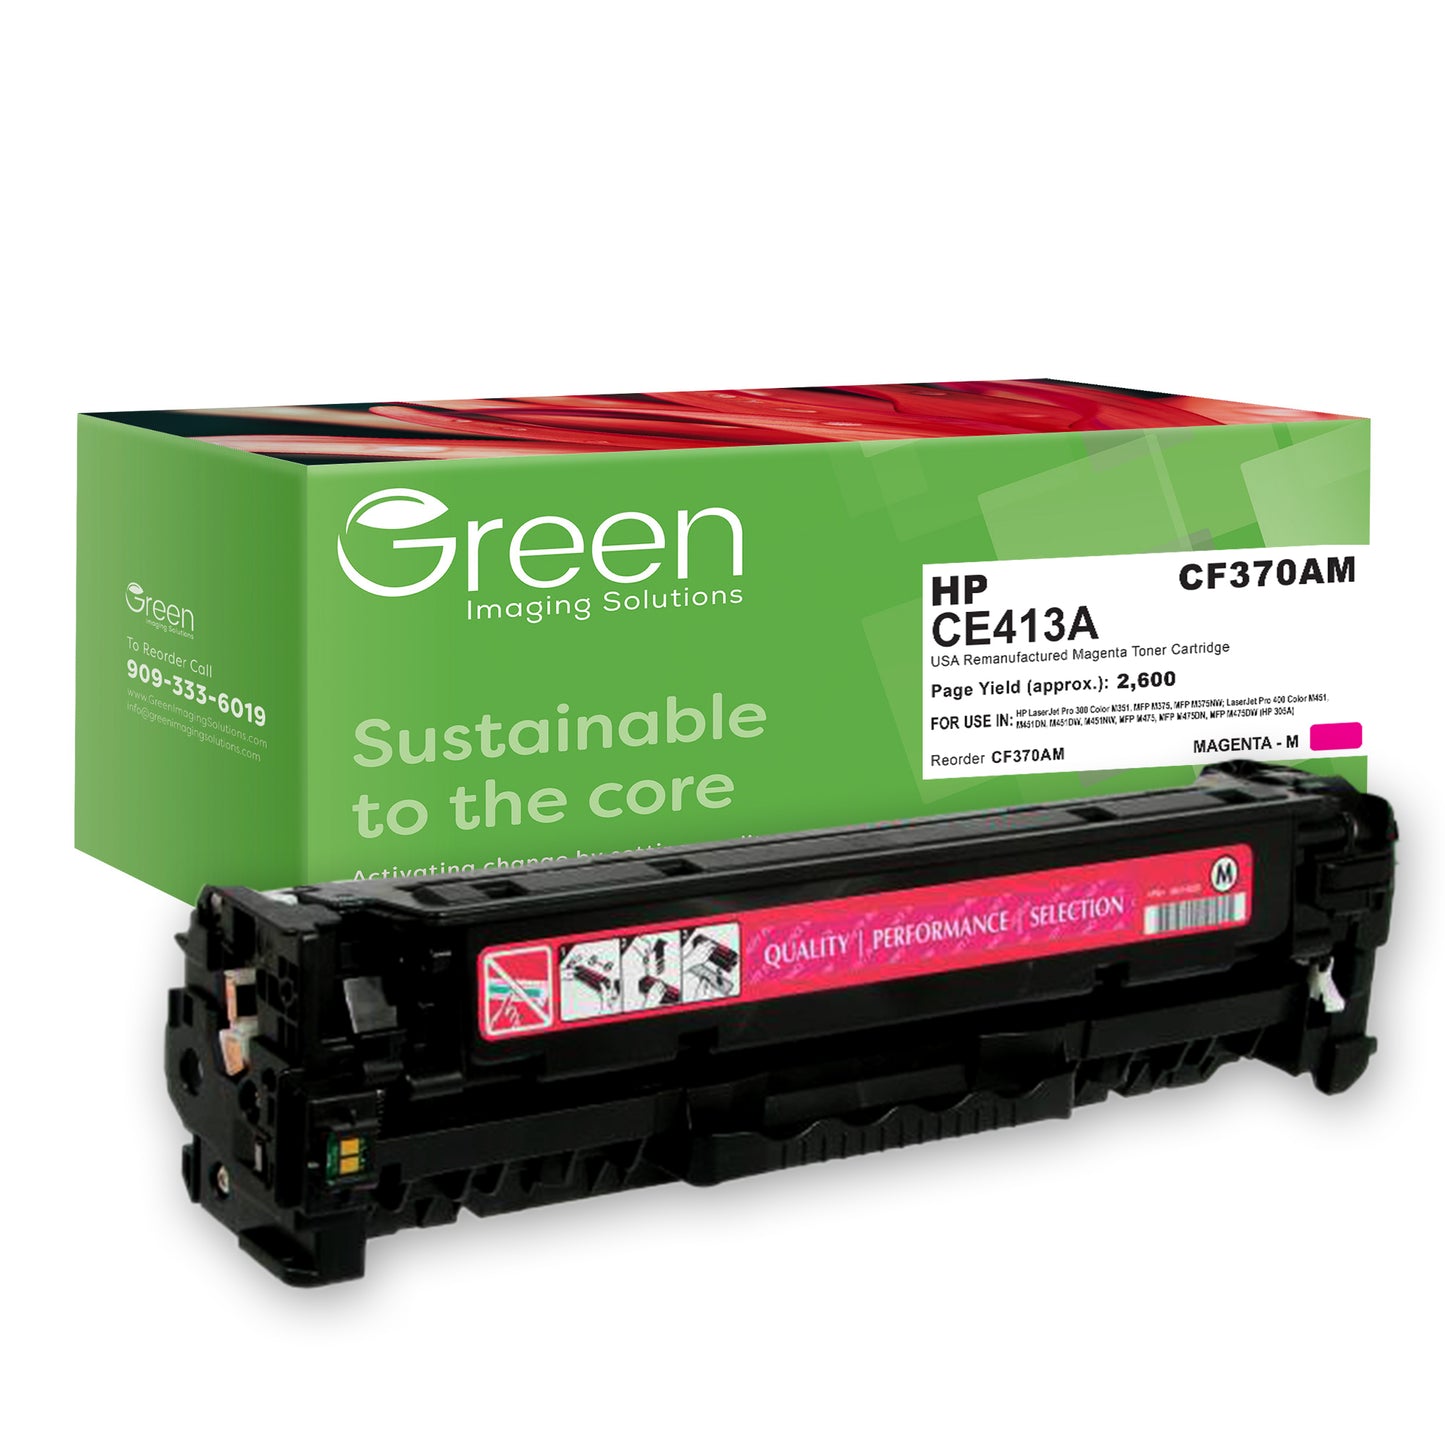 GIS USA Remanufactured Magenta Toner Cartridge for HP CE413A (HP 305A)